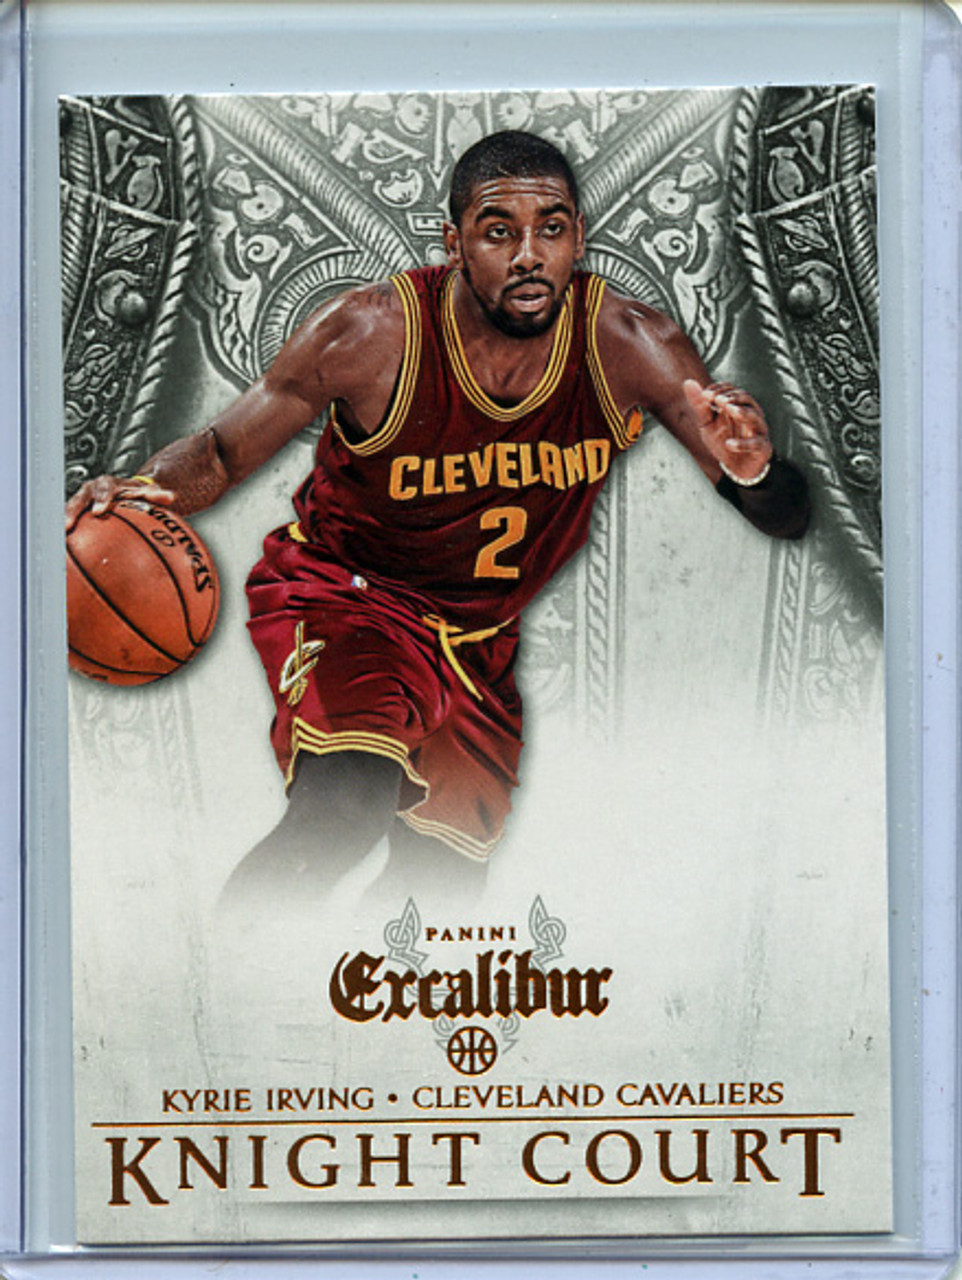 Kyrie Irving 2014-15 Excalibur, Knight Court #2